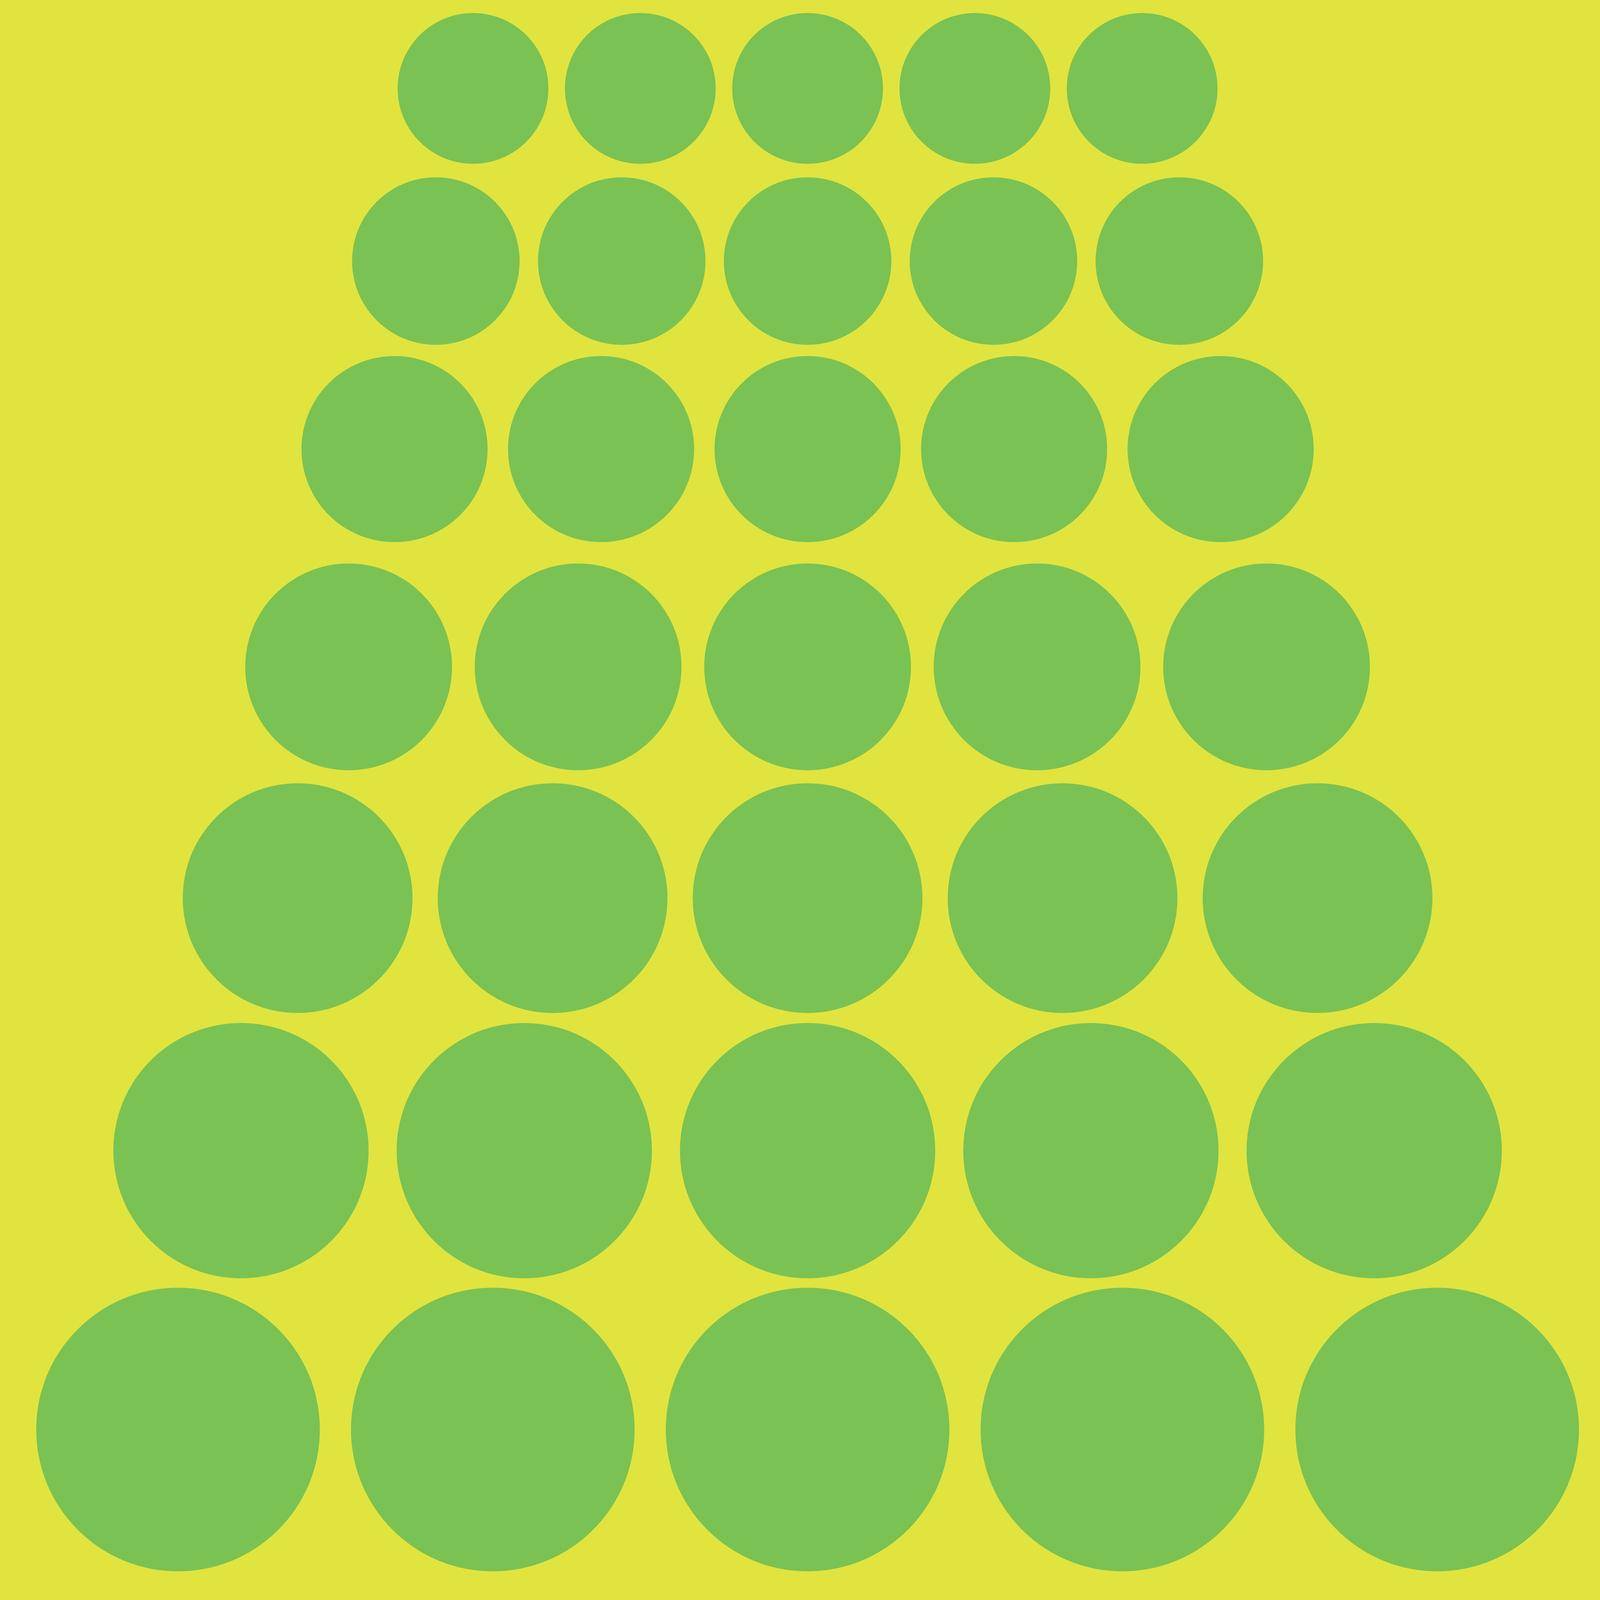 Pattern with green circles and a yellow background. The circles are smaller up so it looks like a perspective.